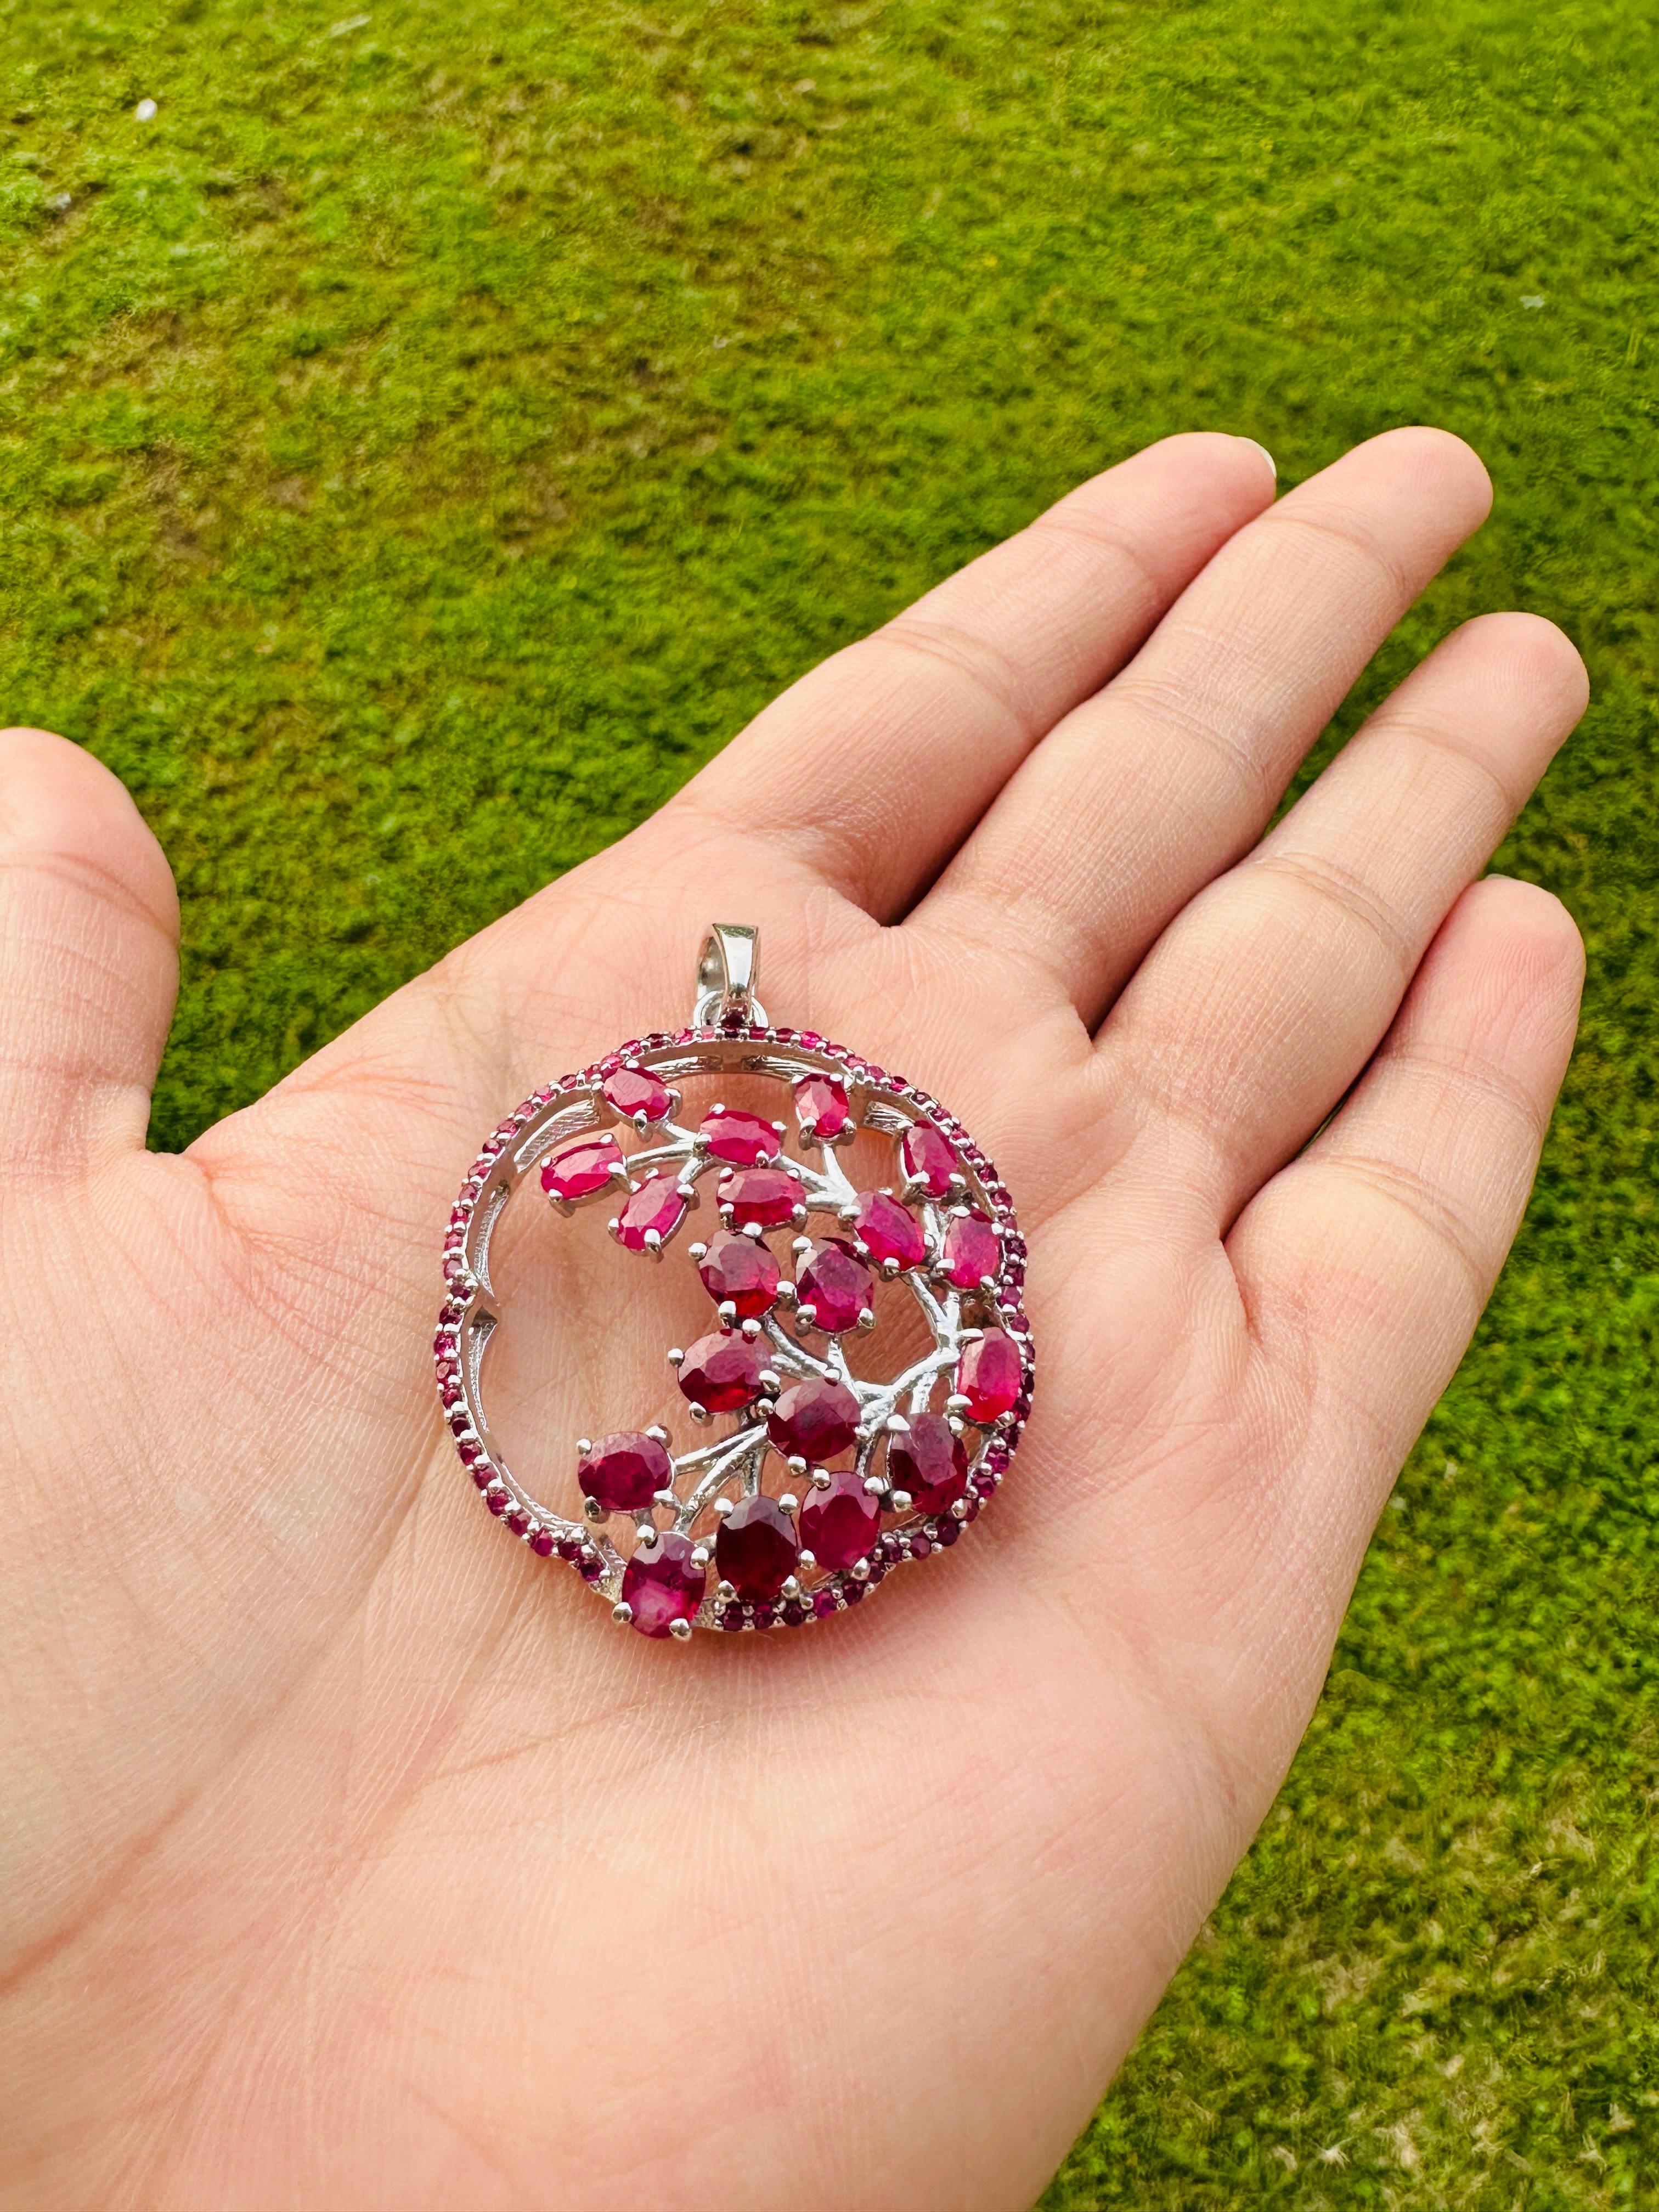 This Genuine Ruby Tree of Life Pendant is meticulously crafted from the finest materials and adorned with stunning ruby which enhances confidence, leadership qualities and attract career opportunities.
This delicate to statement pendants, suits